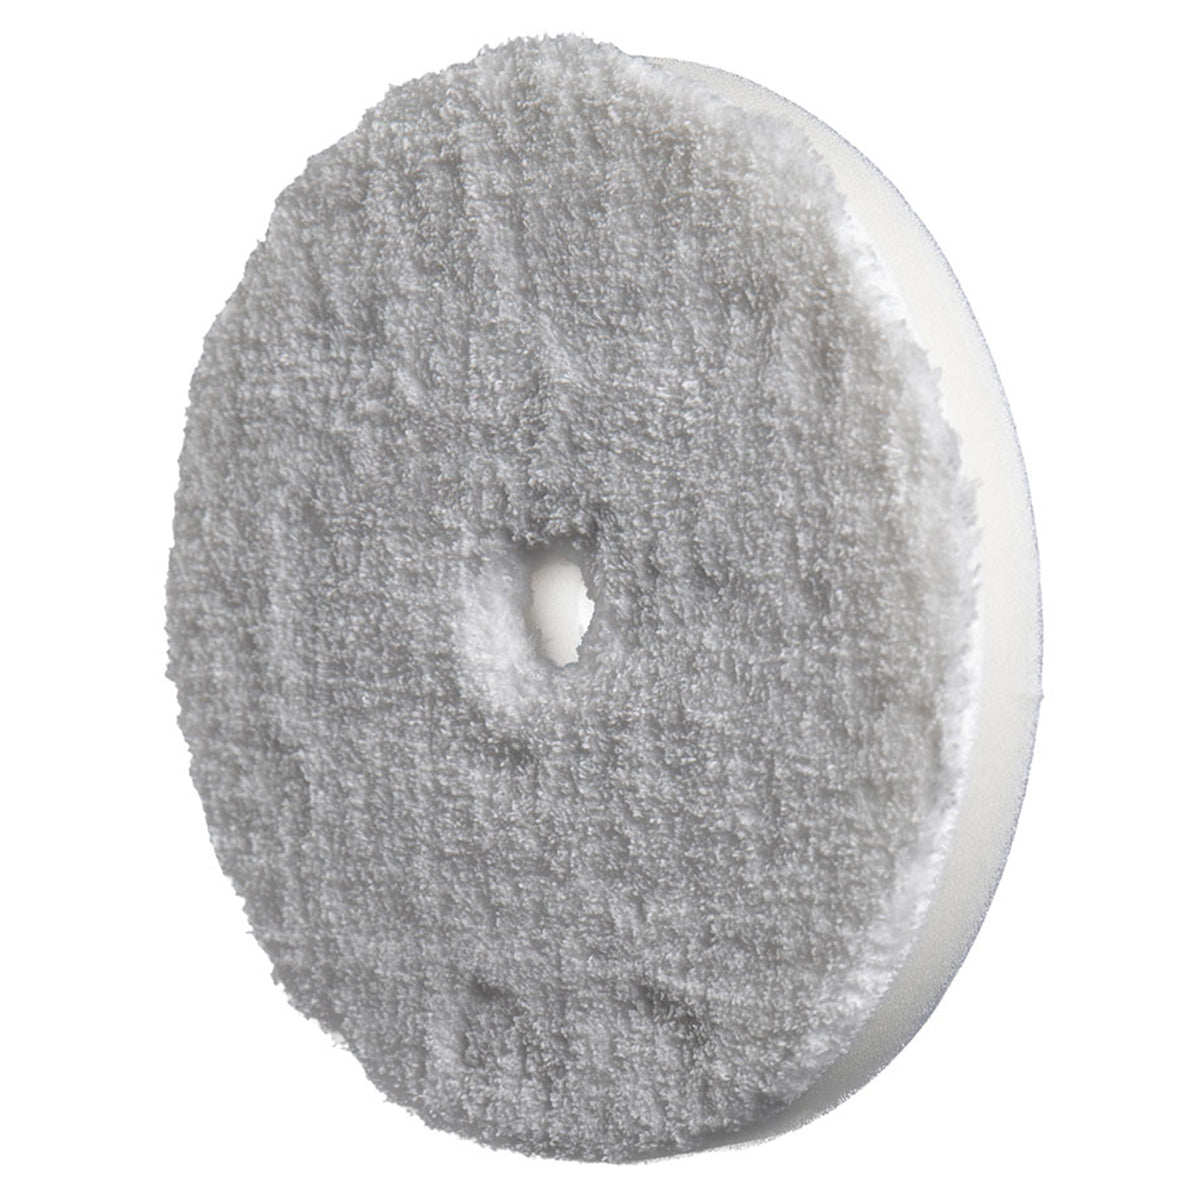 Rupes D-A Ultra-Fine Microfiber Pad - Various Sizes